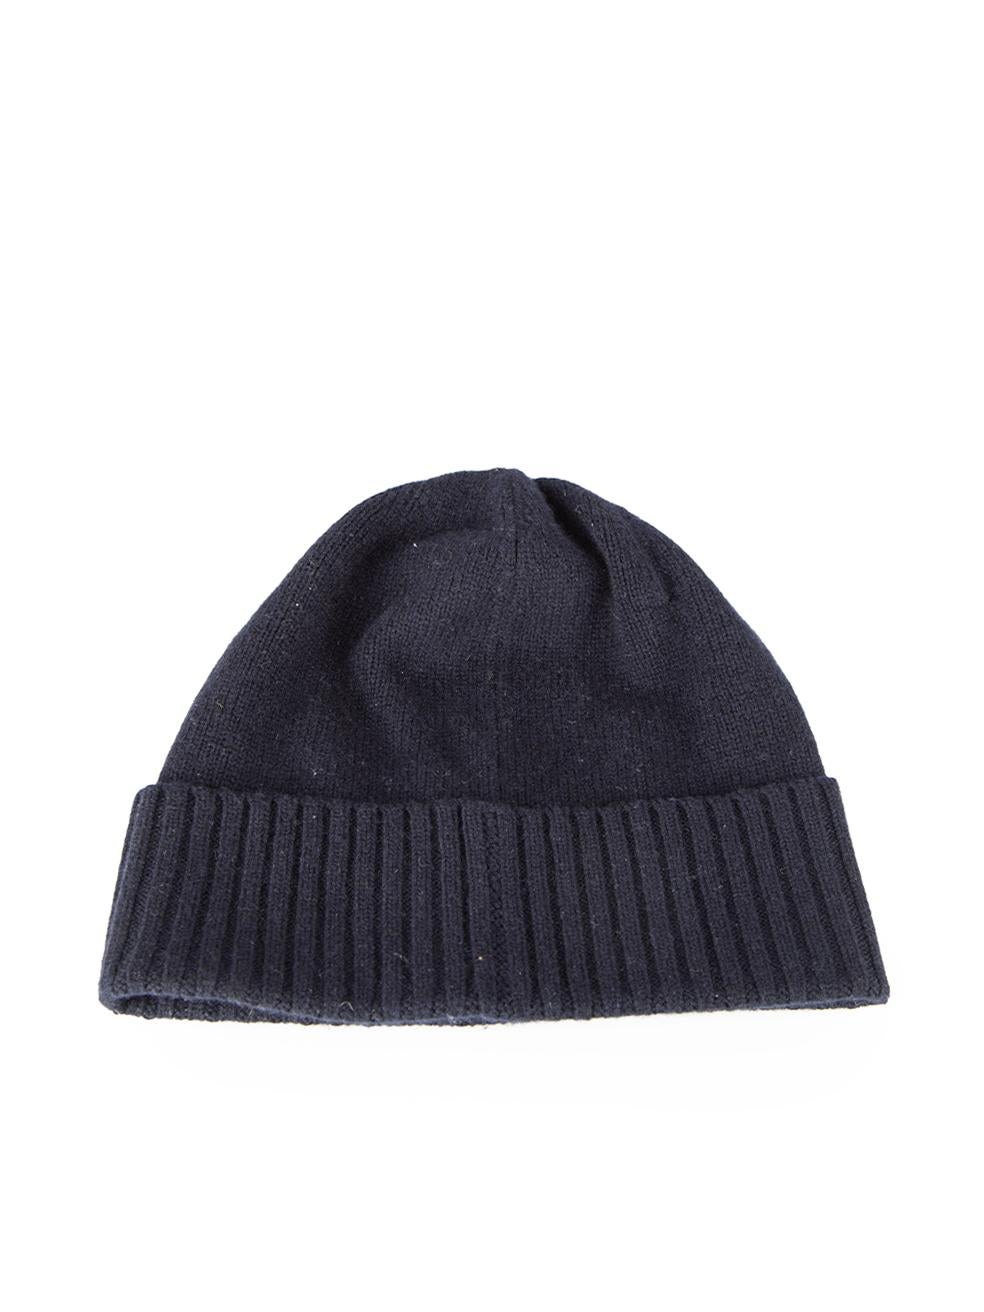 CONDITION is Very good. Hardly any visible wear to hat is evident on this used Totême designer resale item. 



Details


Navy

Wool

Beanie

Knitted



 

Composition

NO COMPOSITION LABEL BUT FEELS LIKE WOOL



Size & Fit

Product